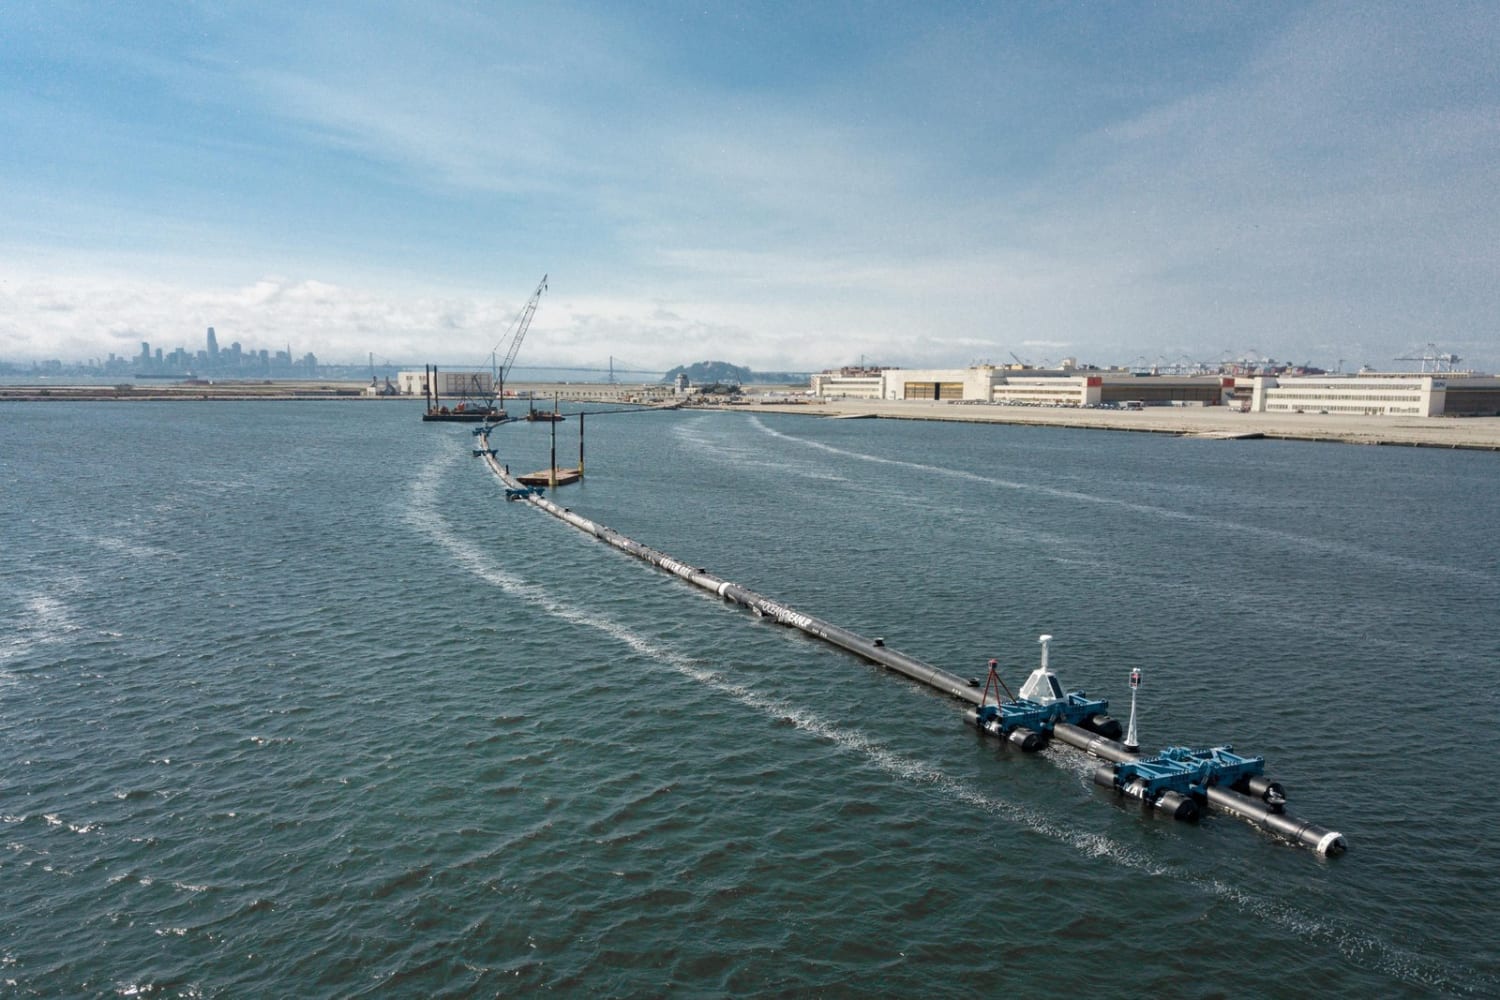 2,000-Foot-Long Plastic Catcher Released to Aid Cleanup of Great Pacific Garbage Patch